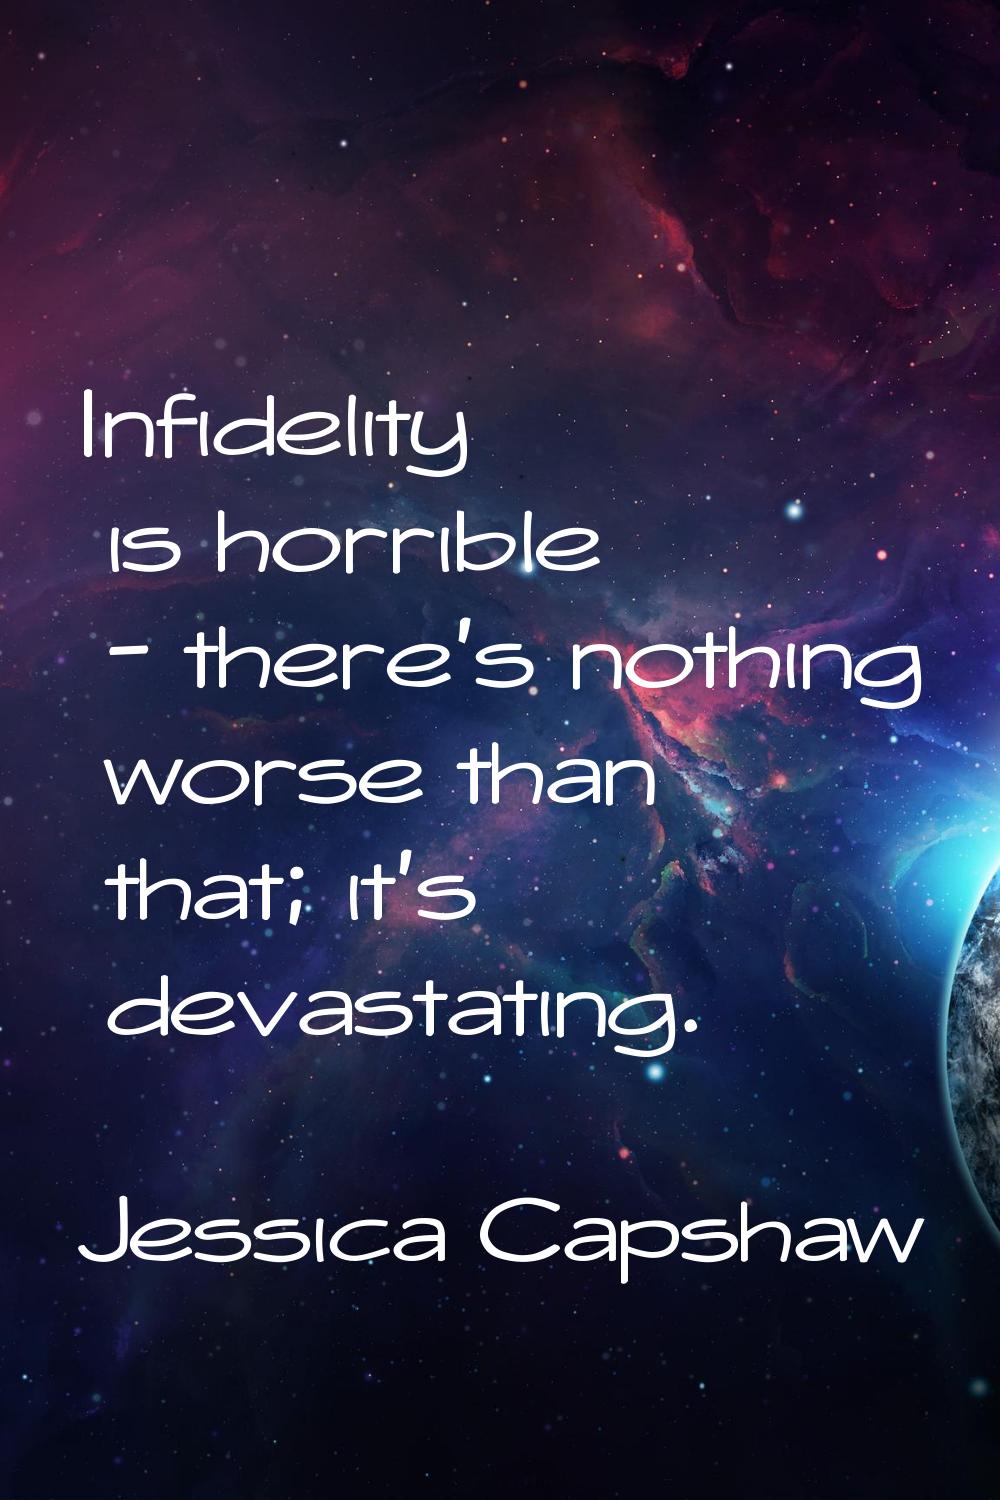 Infidelity is horrible - there's nothing worse than that; it's devastating.